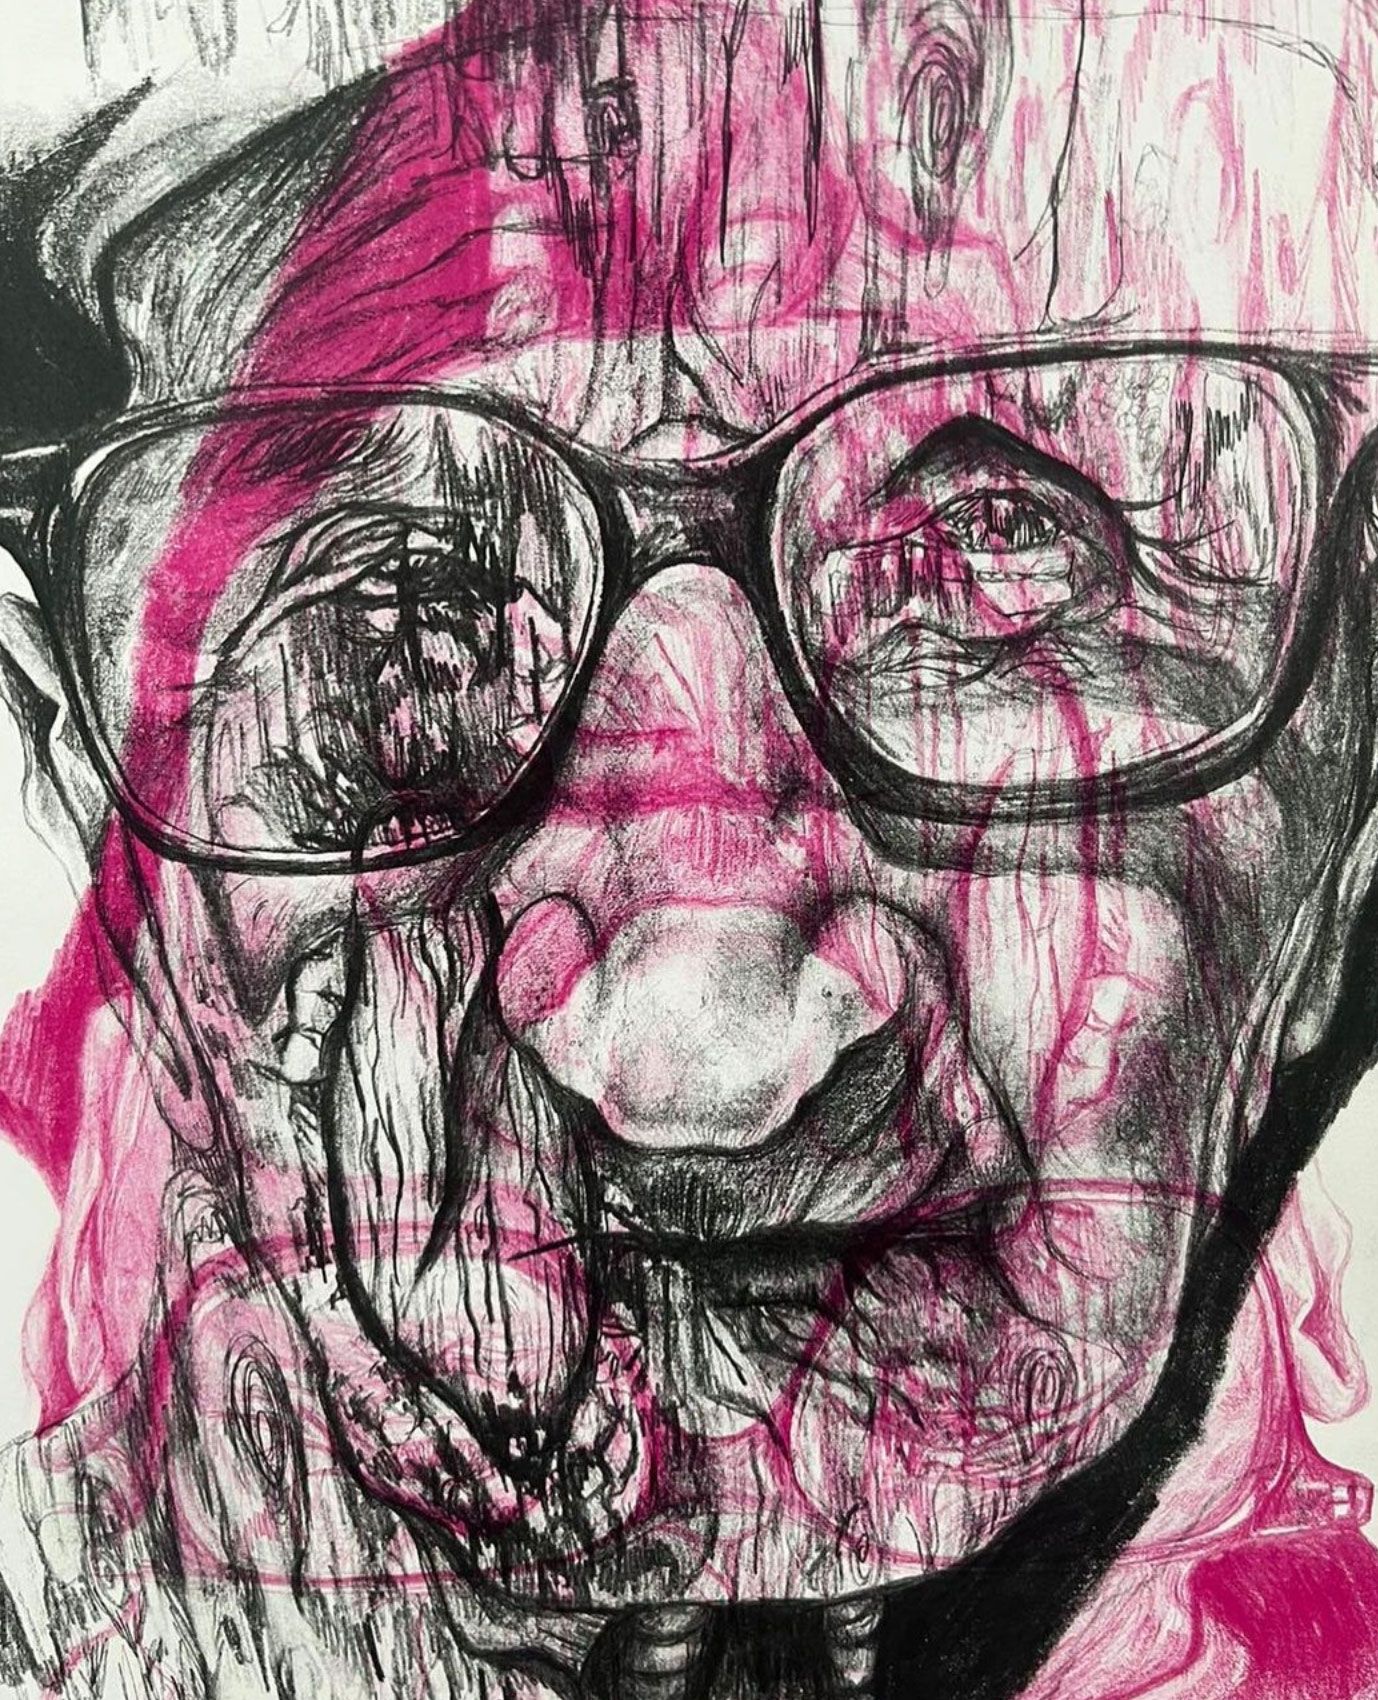 A drawing of a man's face with pink splashes over his face.